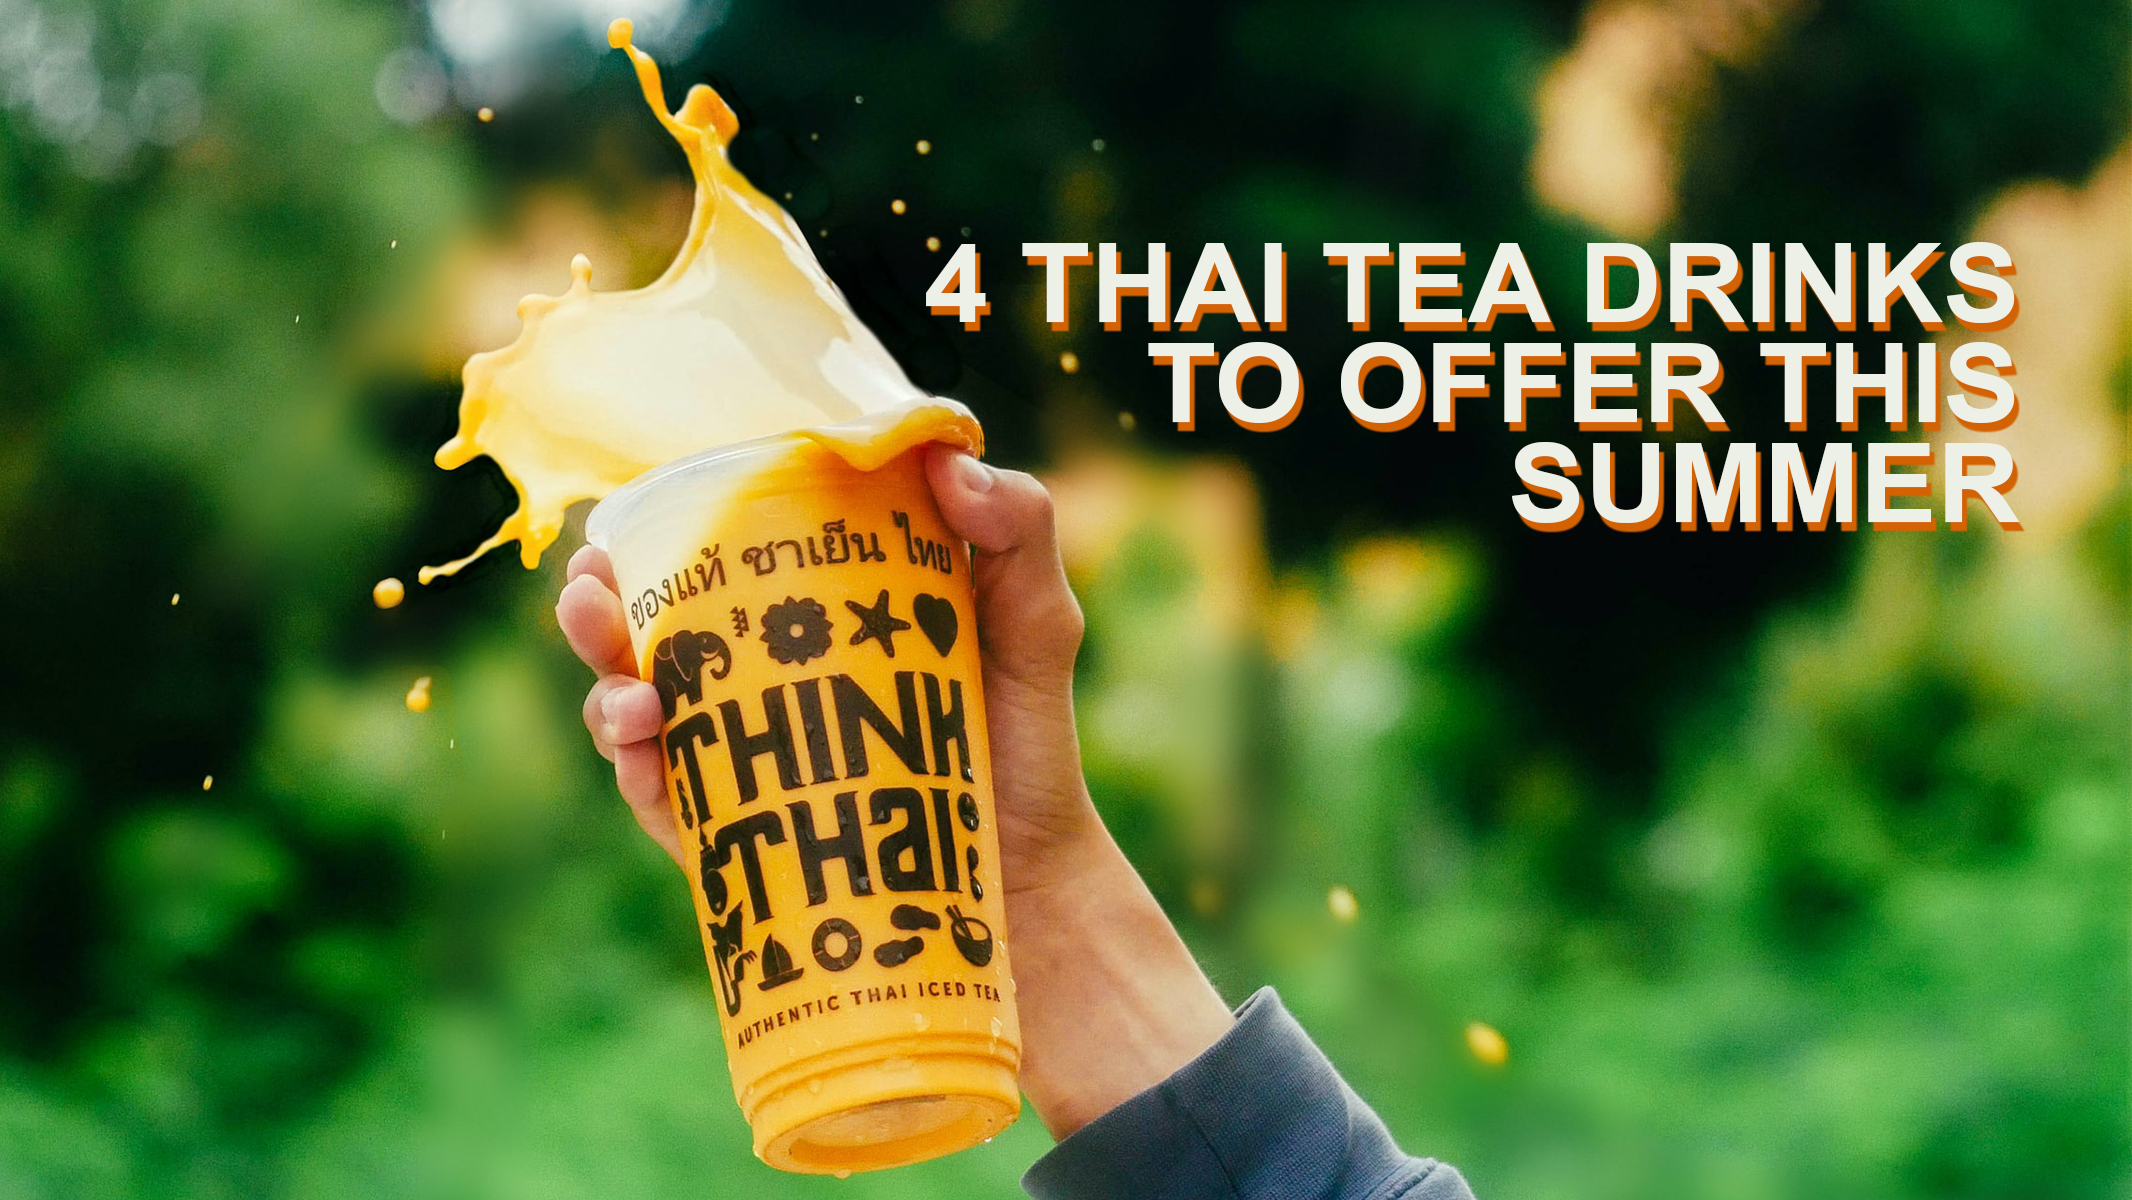 4 Thai Tea Drinks to Offer This Summer